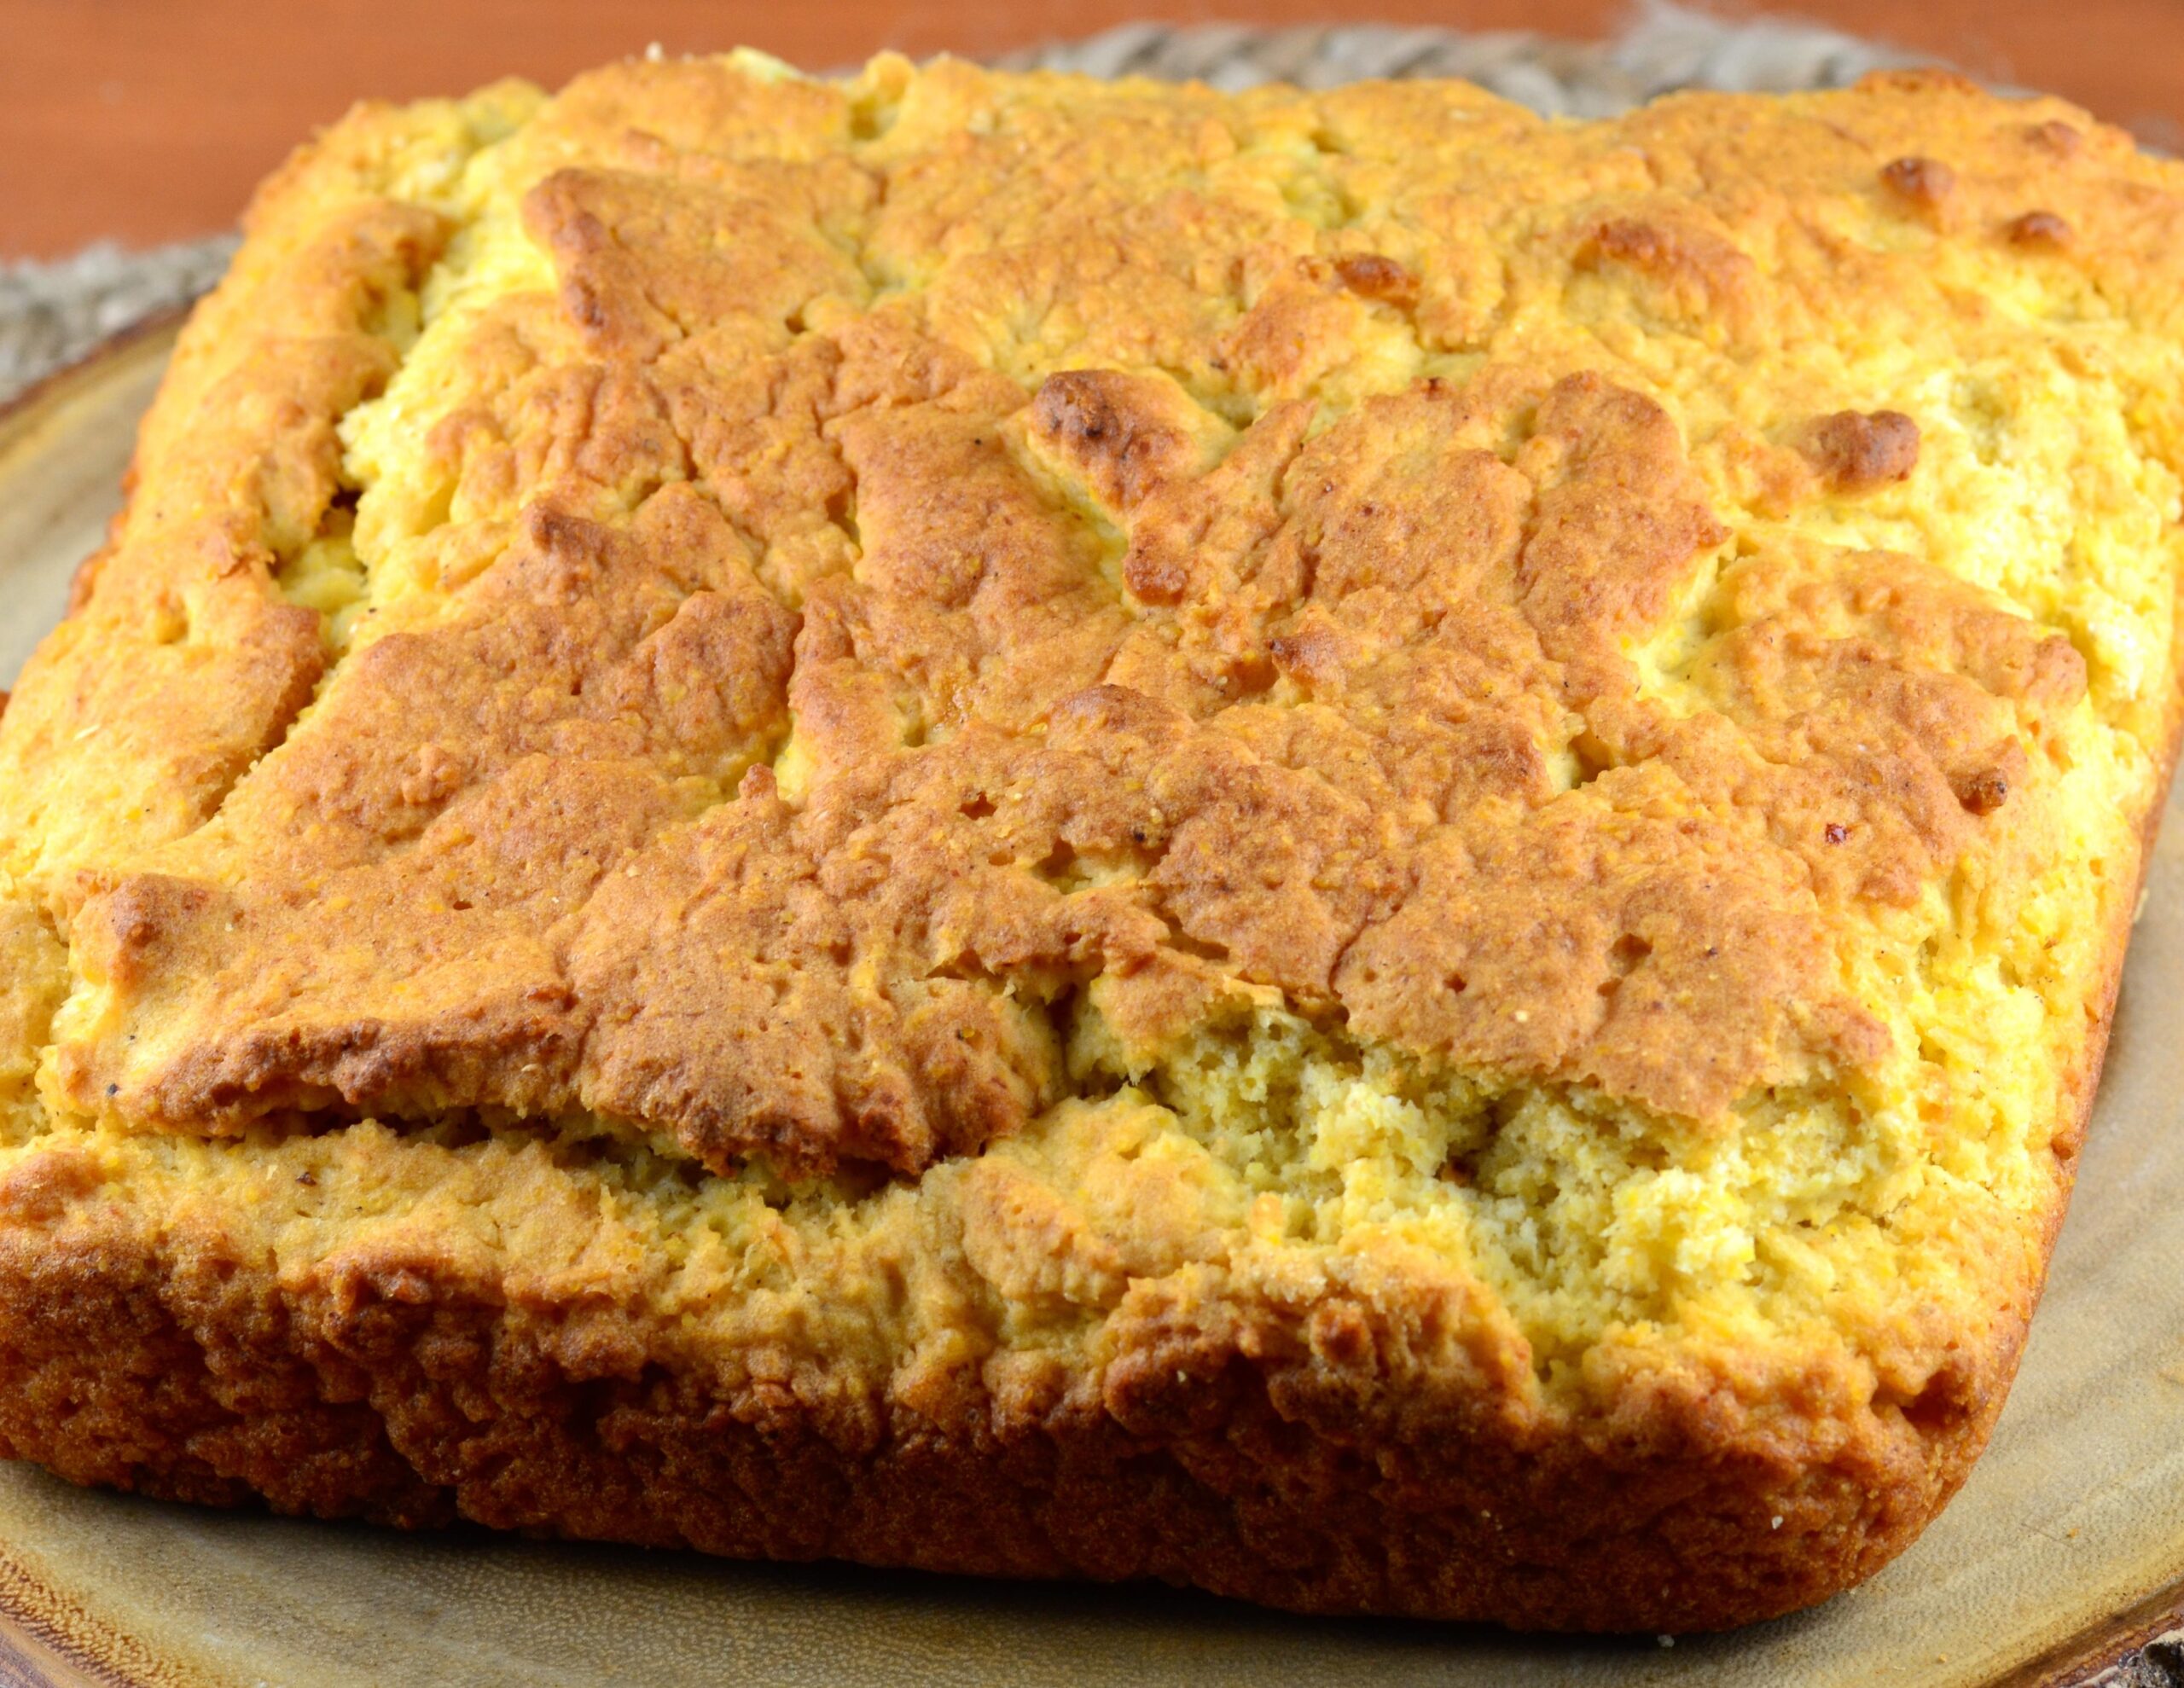  A slice of heaven: enjoy a warm and hearty piece of cornbread on a chilly evening.